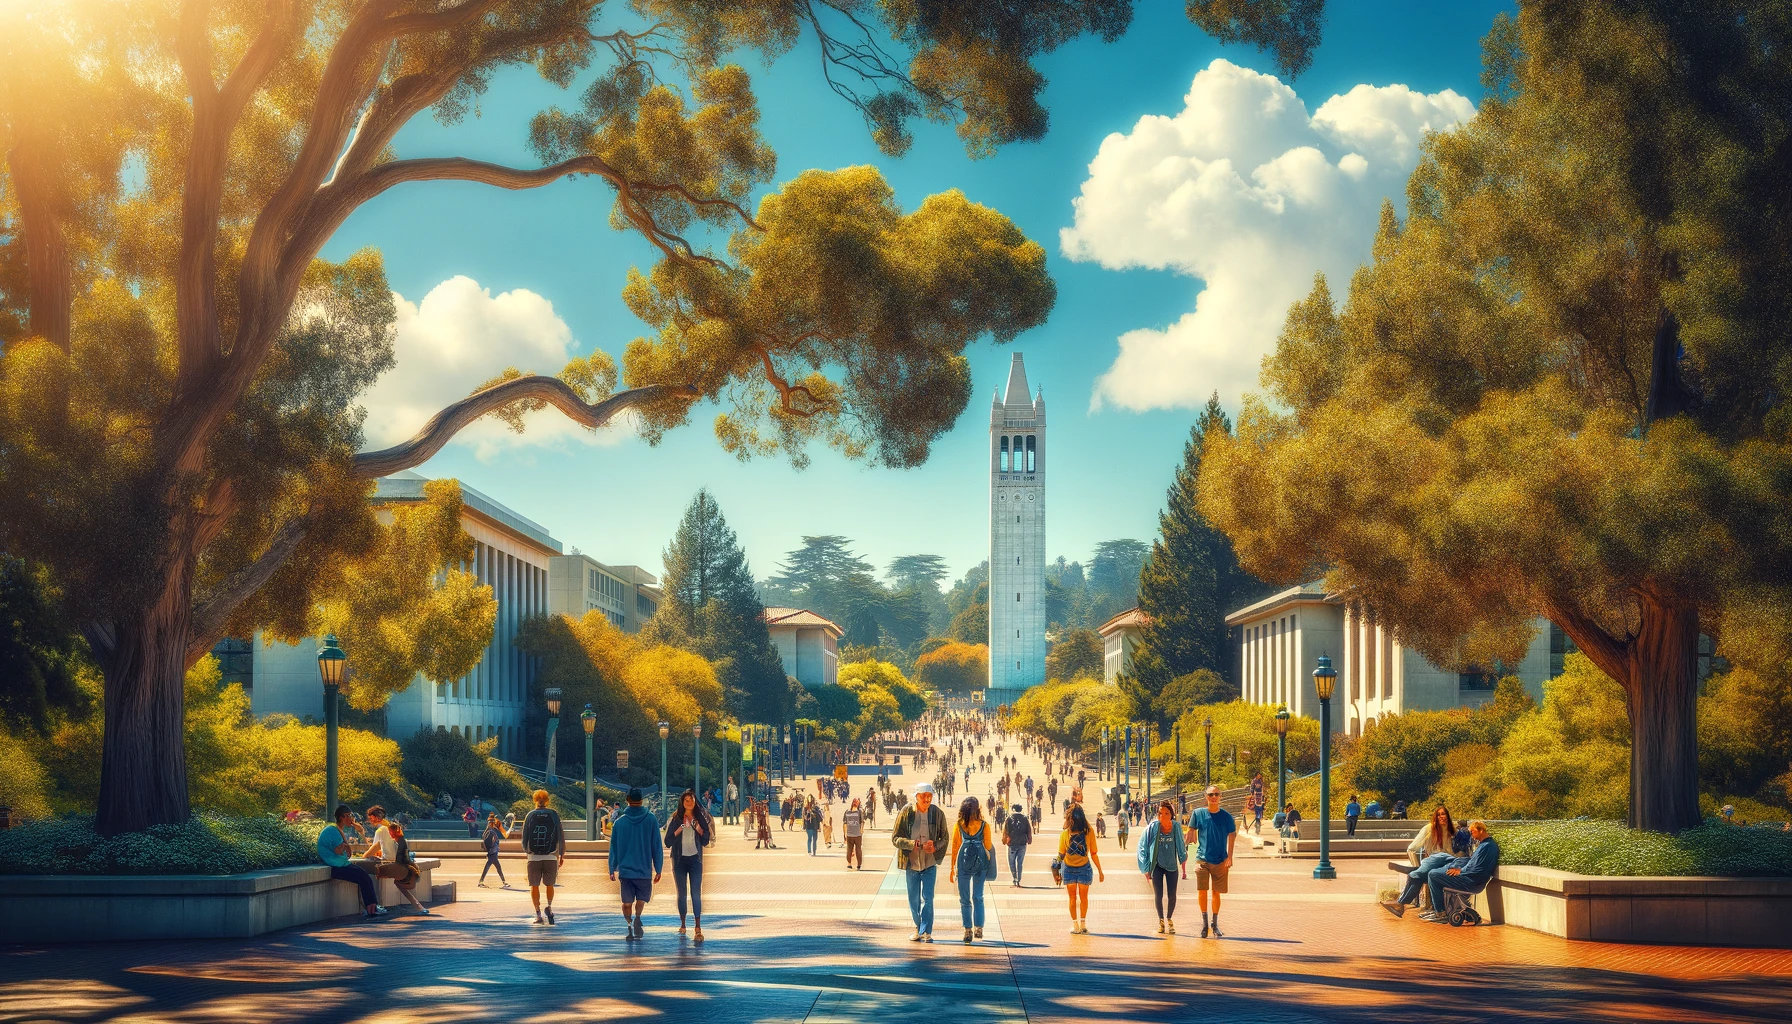 A bright, sunny day in Berkeley, California with clear blue skies, featuring Sather Tower on the UC Berkeley campus, surrounded by lush green trees and people enjoying the outdoors.